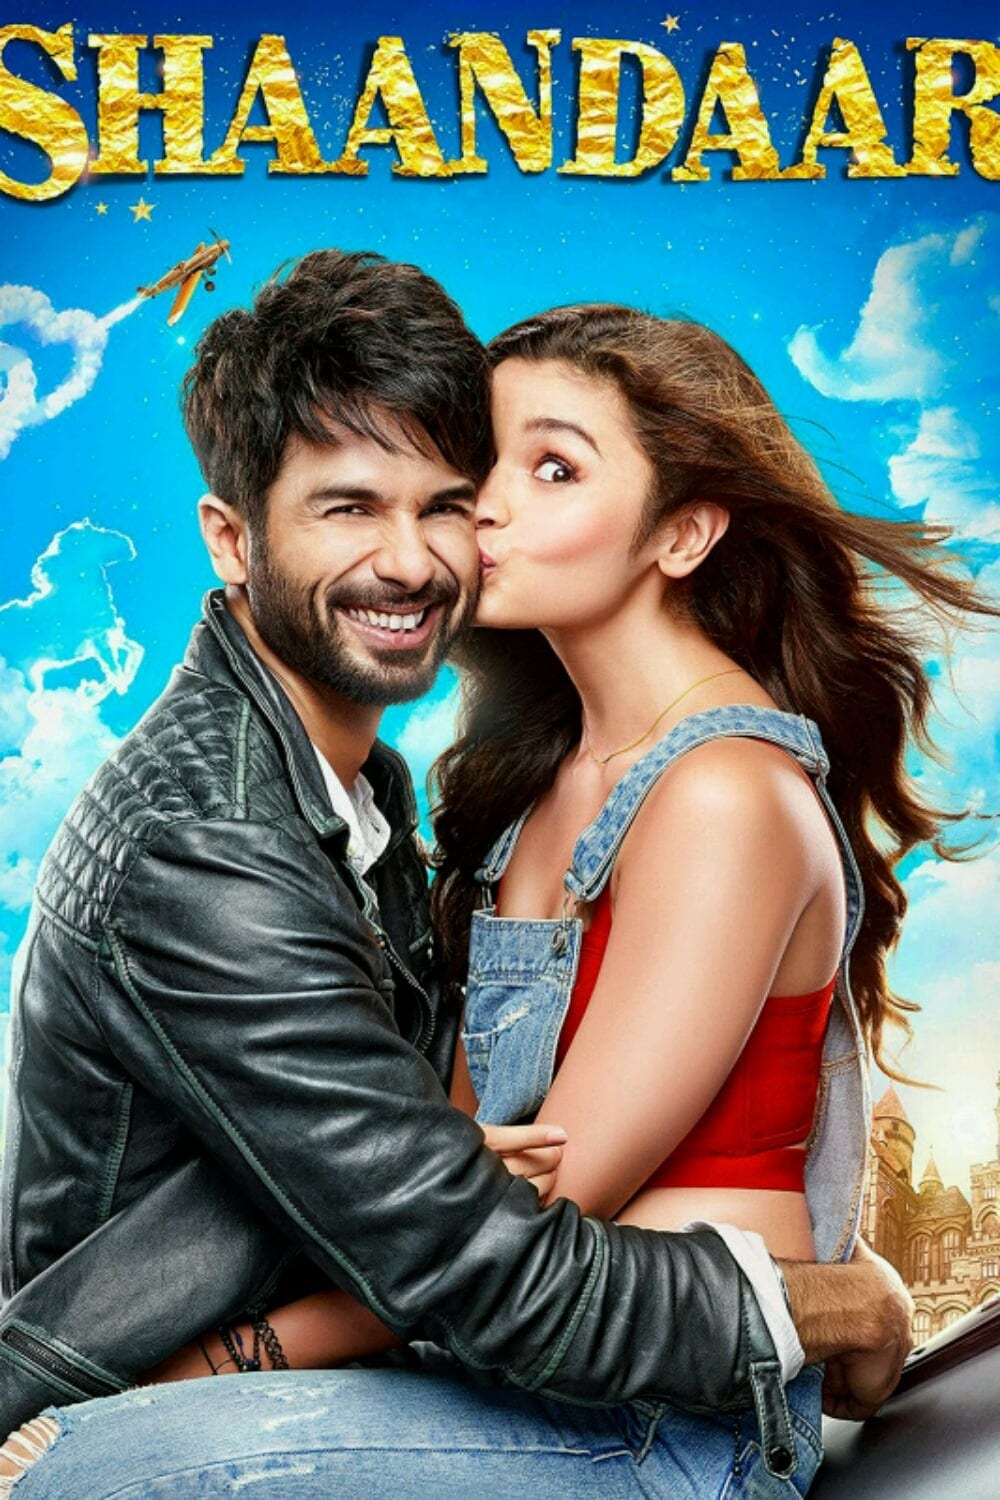 Poster for the movie "Shaandaar"